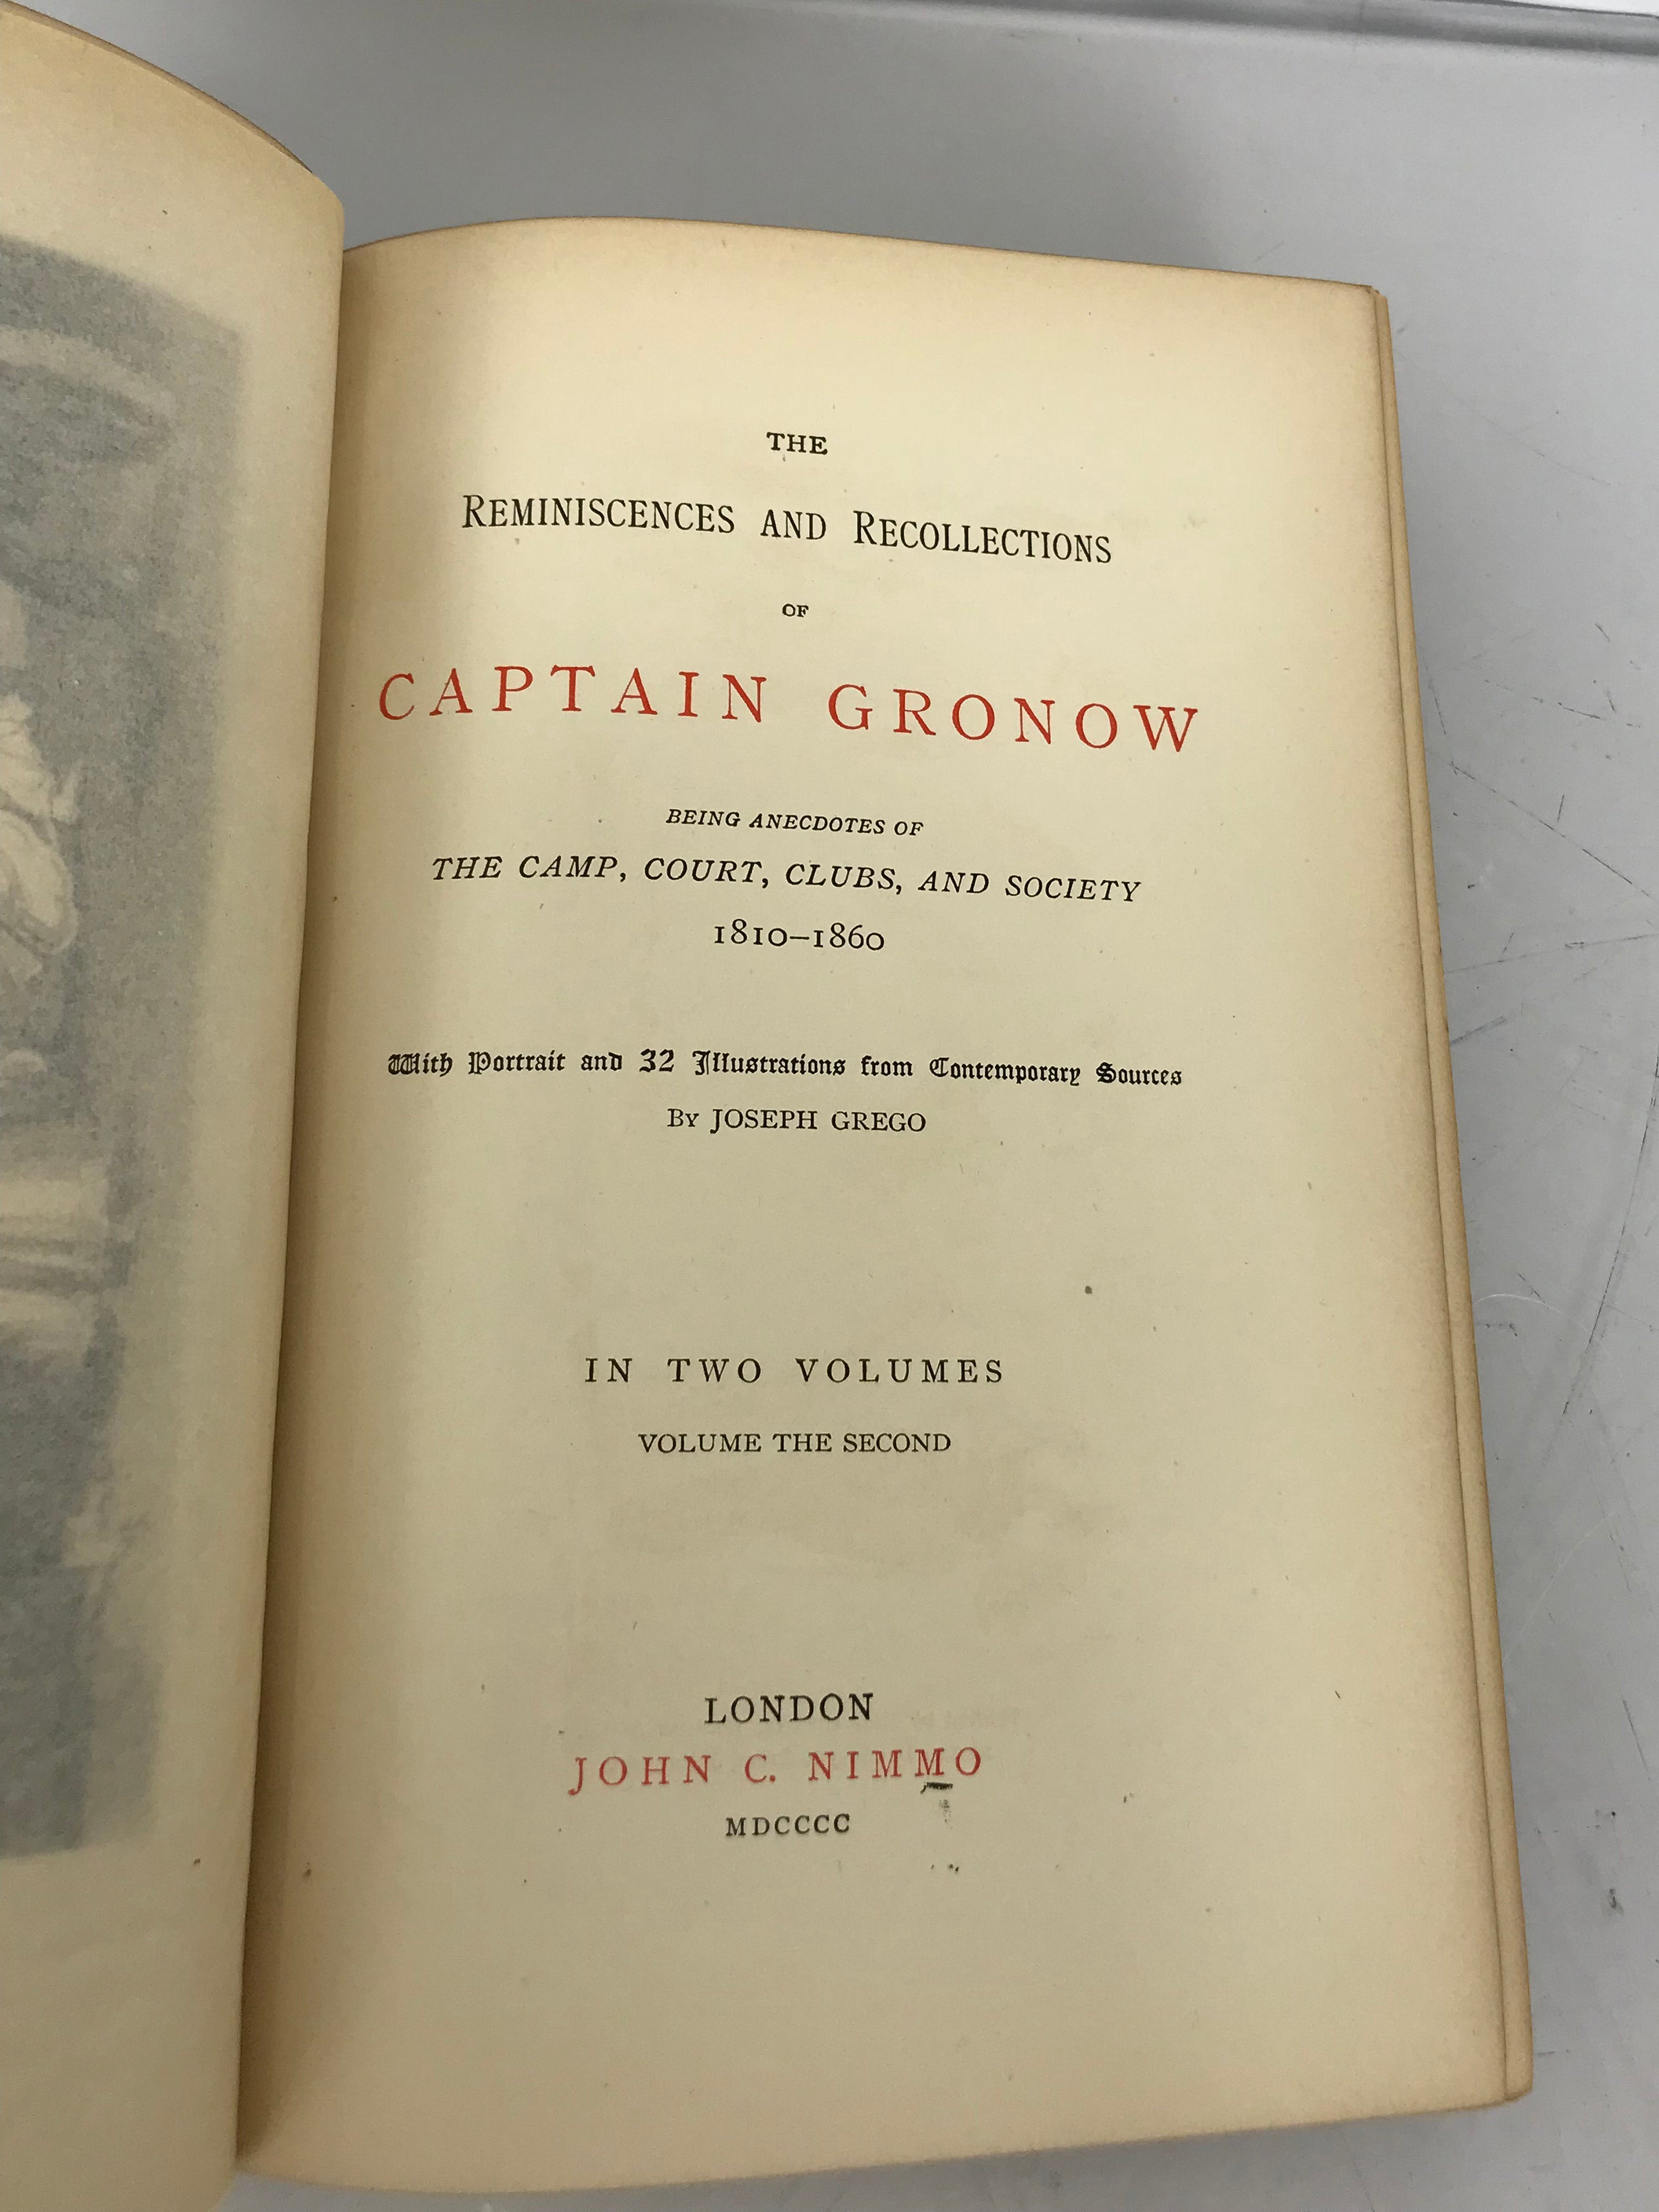 The Reminiscences and Recollections of Captain Gronow Vol 1-2